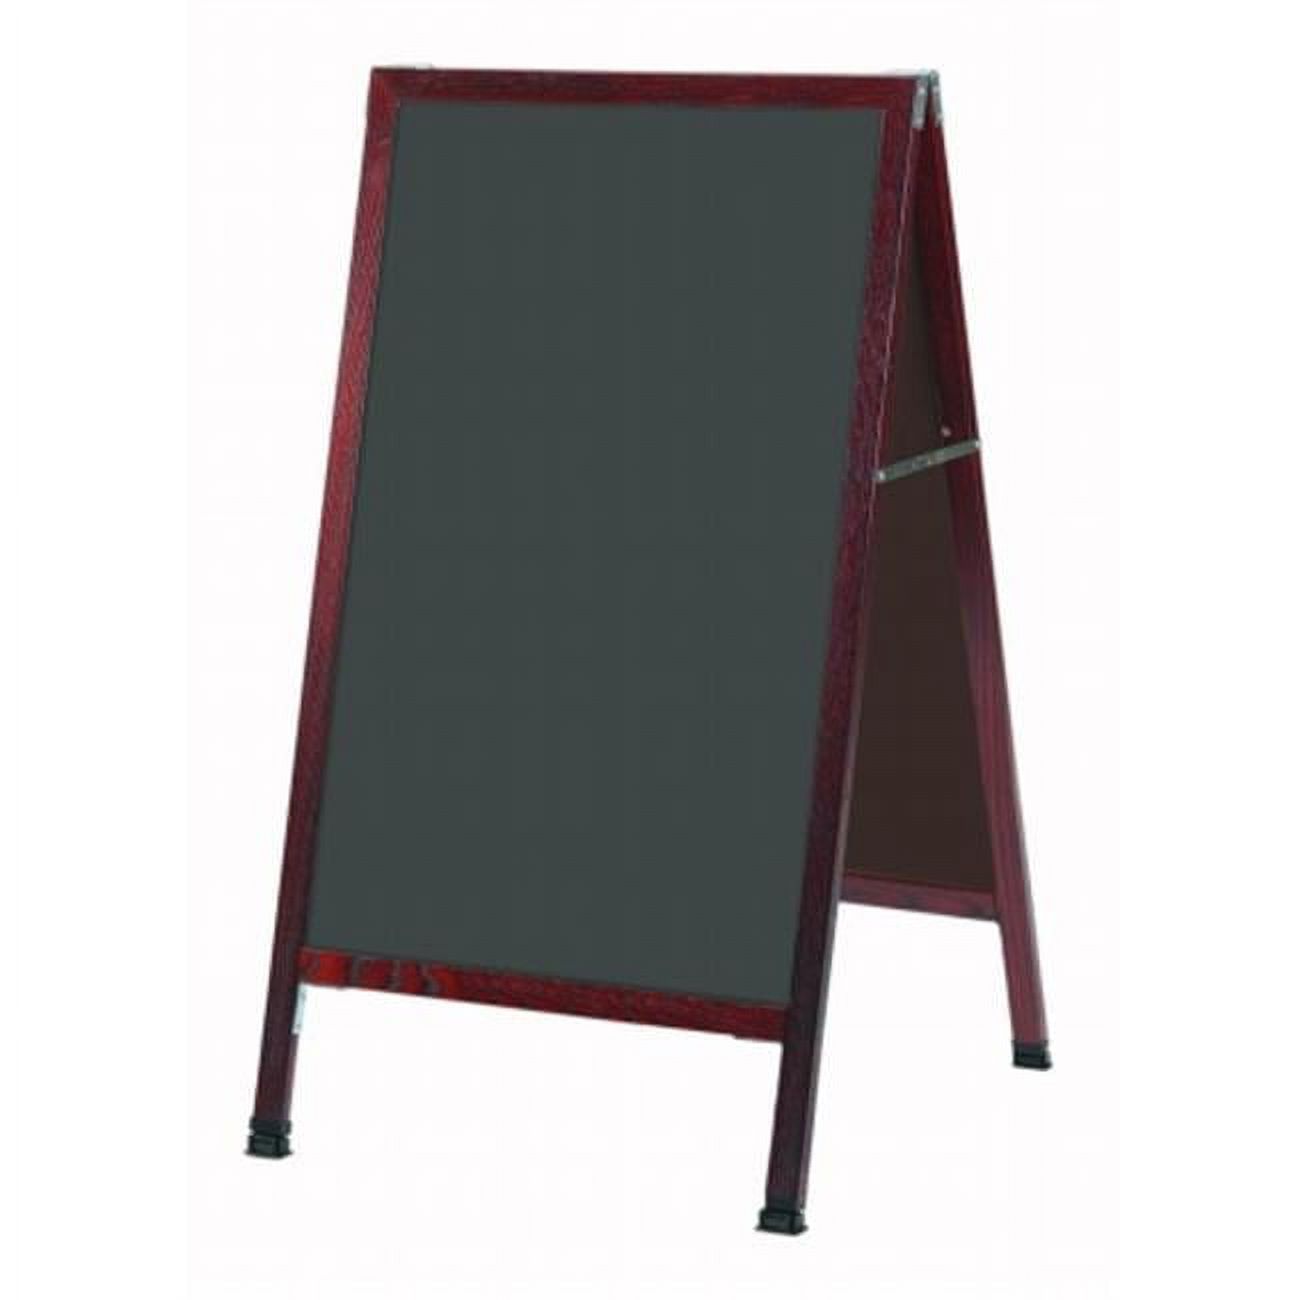 Aarco Products  Inc. MA-1SS A-Frame Sidewalk Board Features a Slate Colored Porcelain Chalkboard and Solid Red Oak Frame with Cherry Stain. Size 42 in.Hx24 in.W - image 1 of 1